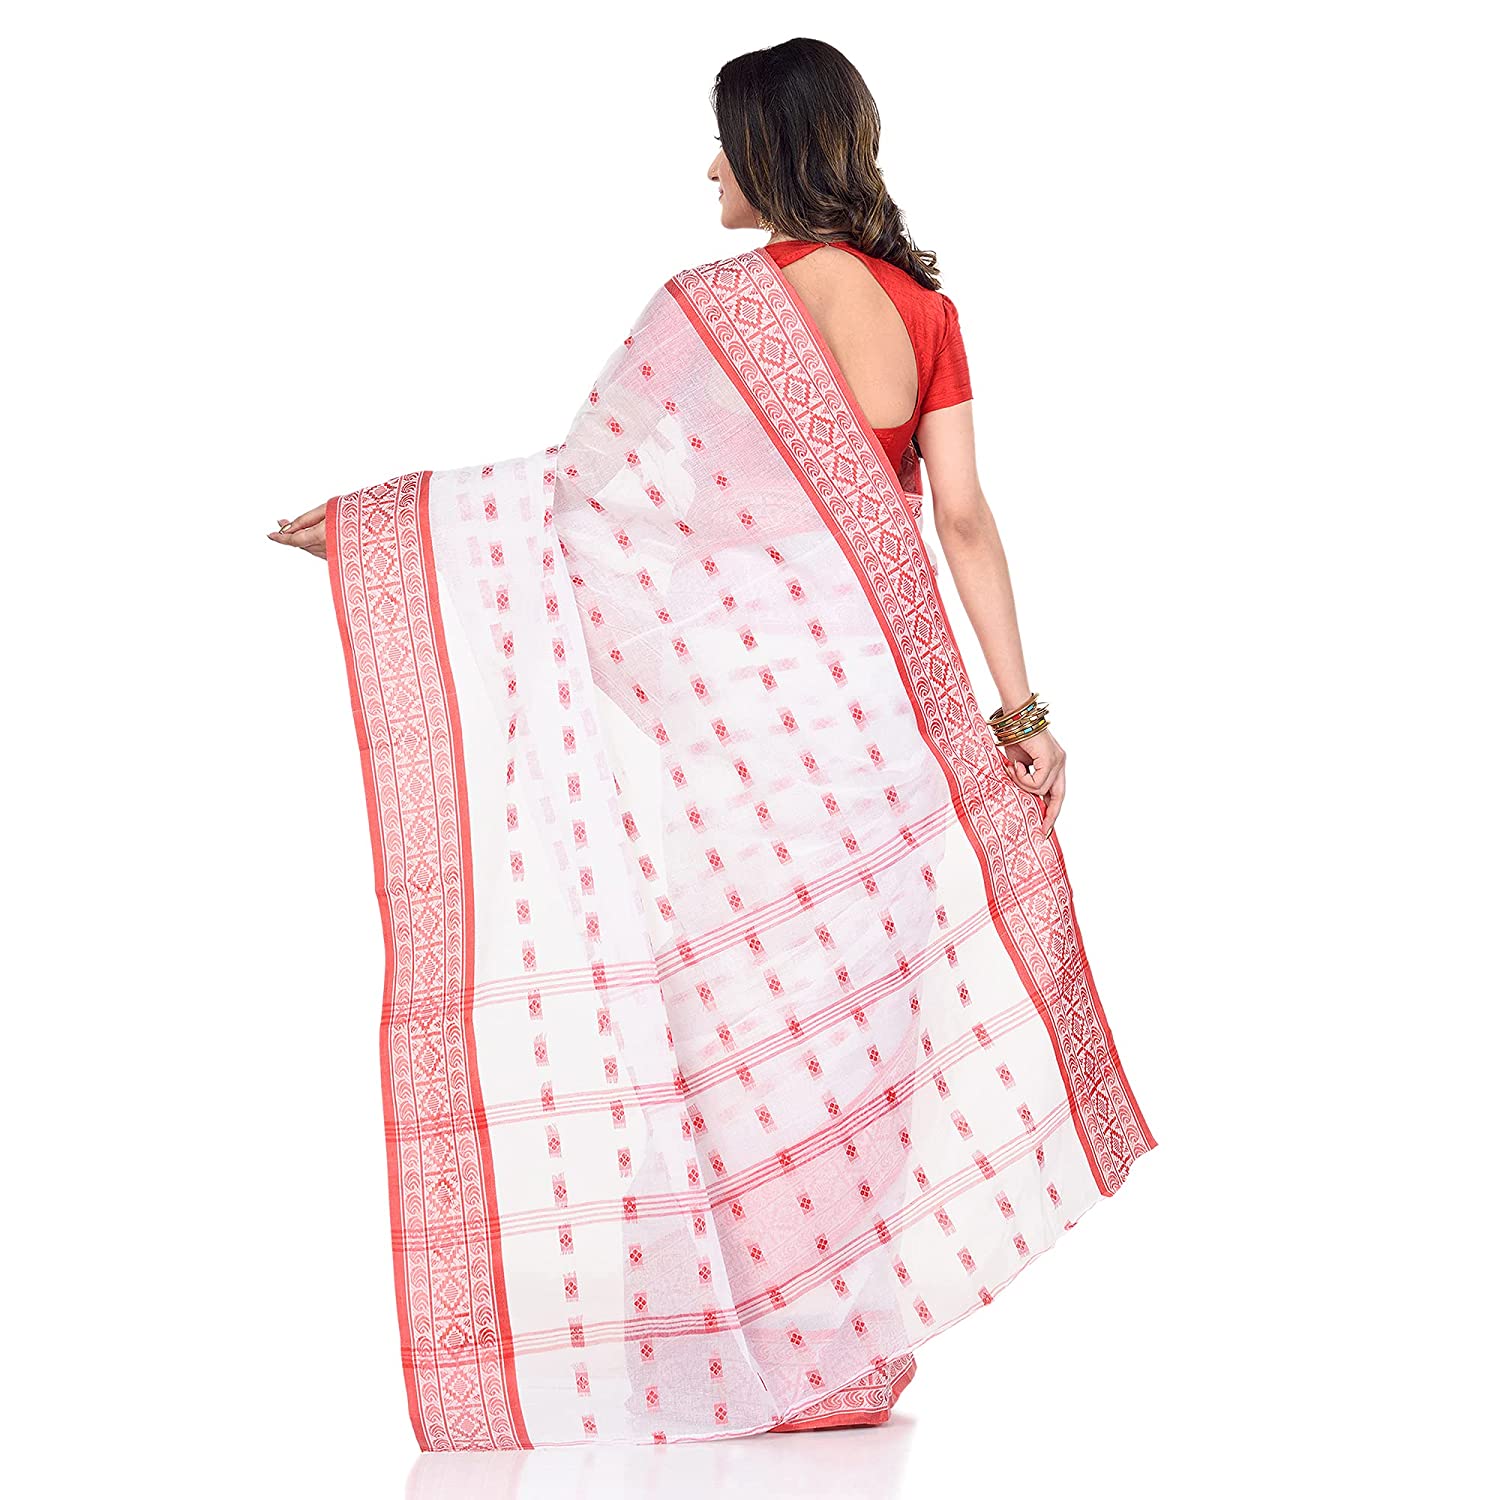 Buy Women's Minakari Jamdani Saree Pure Linen Silk Black and Red Colour  Without Blouse Piece (Rapier25_ Black & Red) at Amazon.in